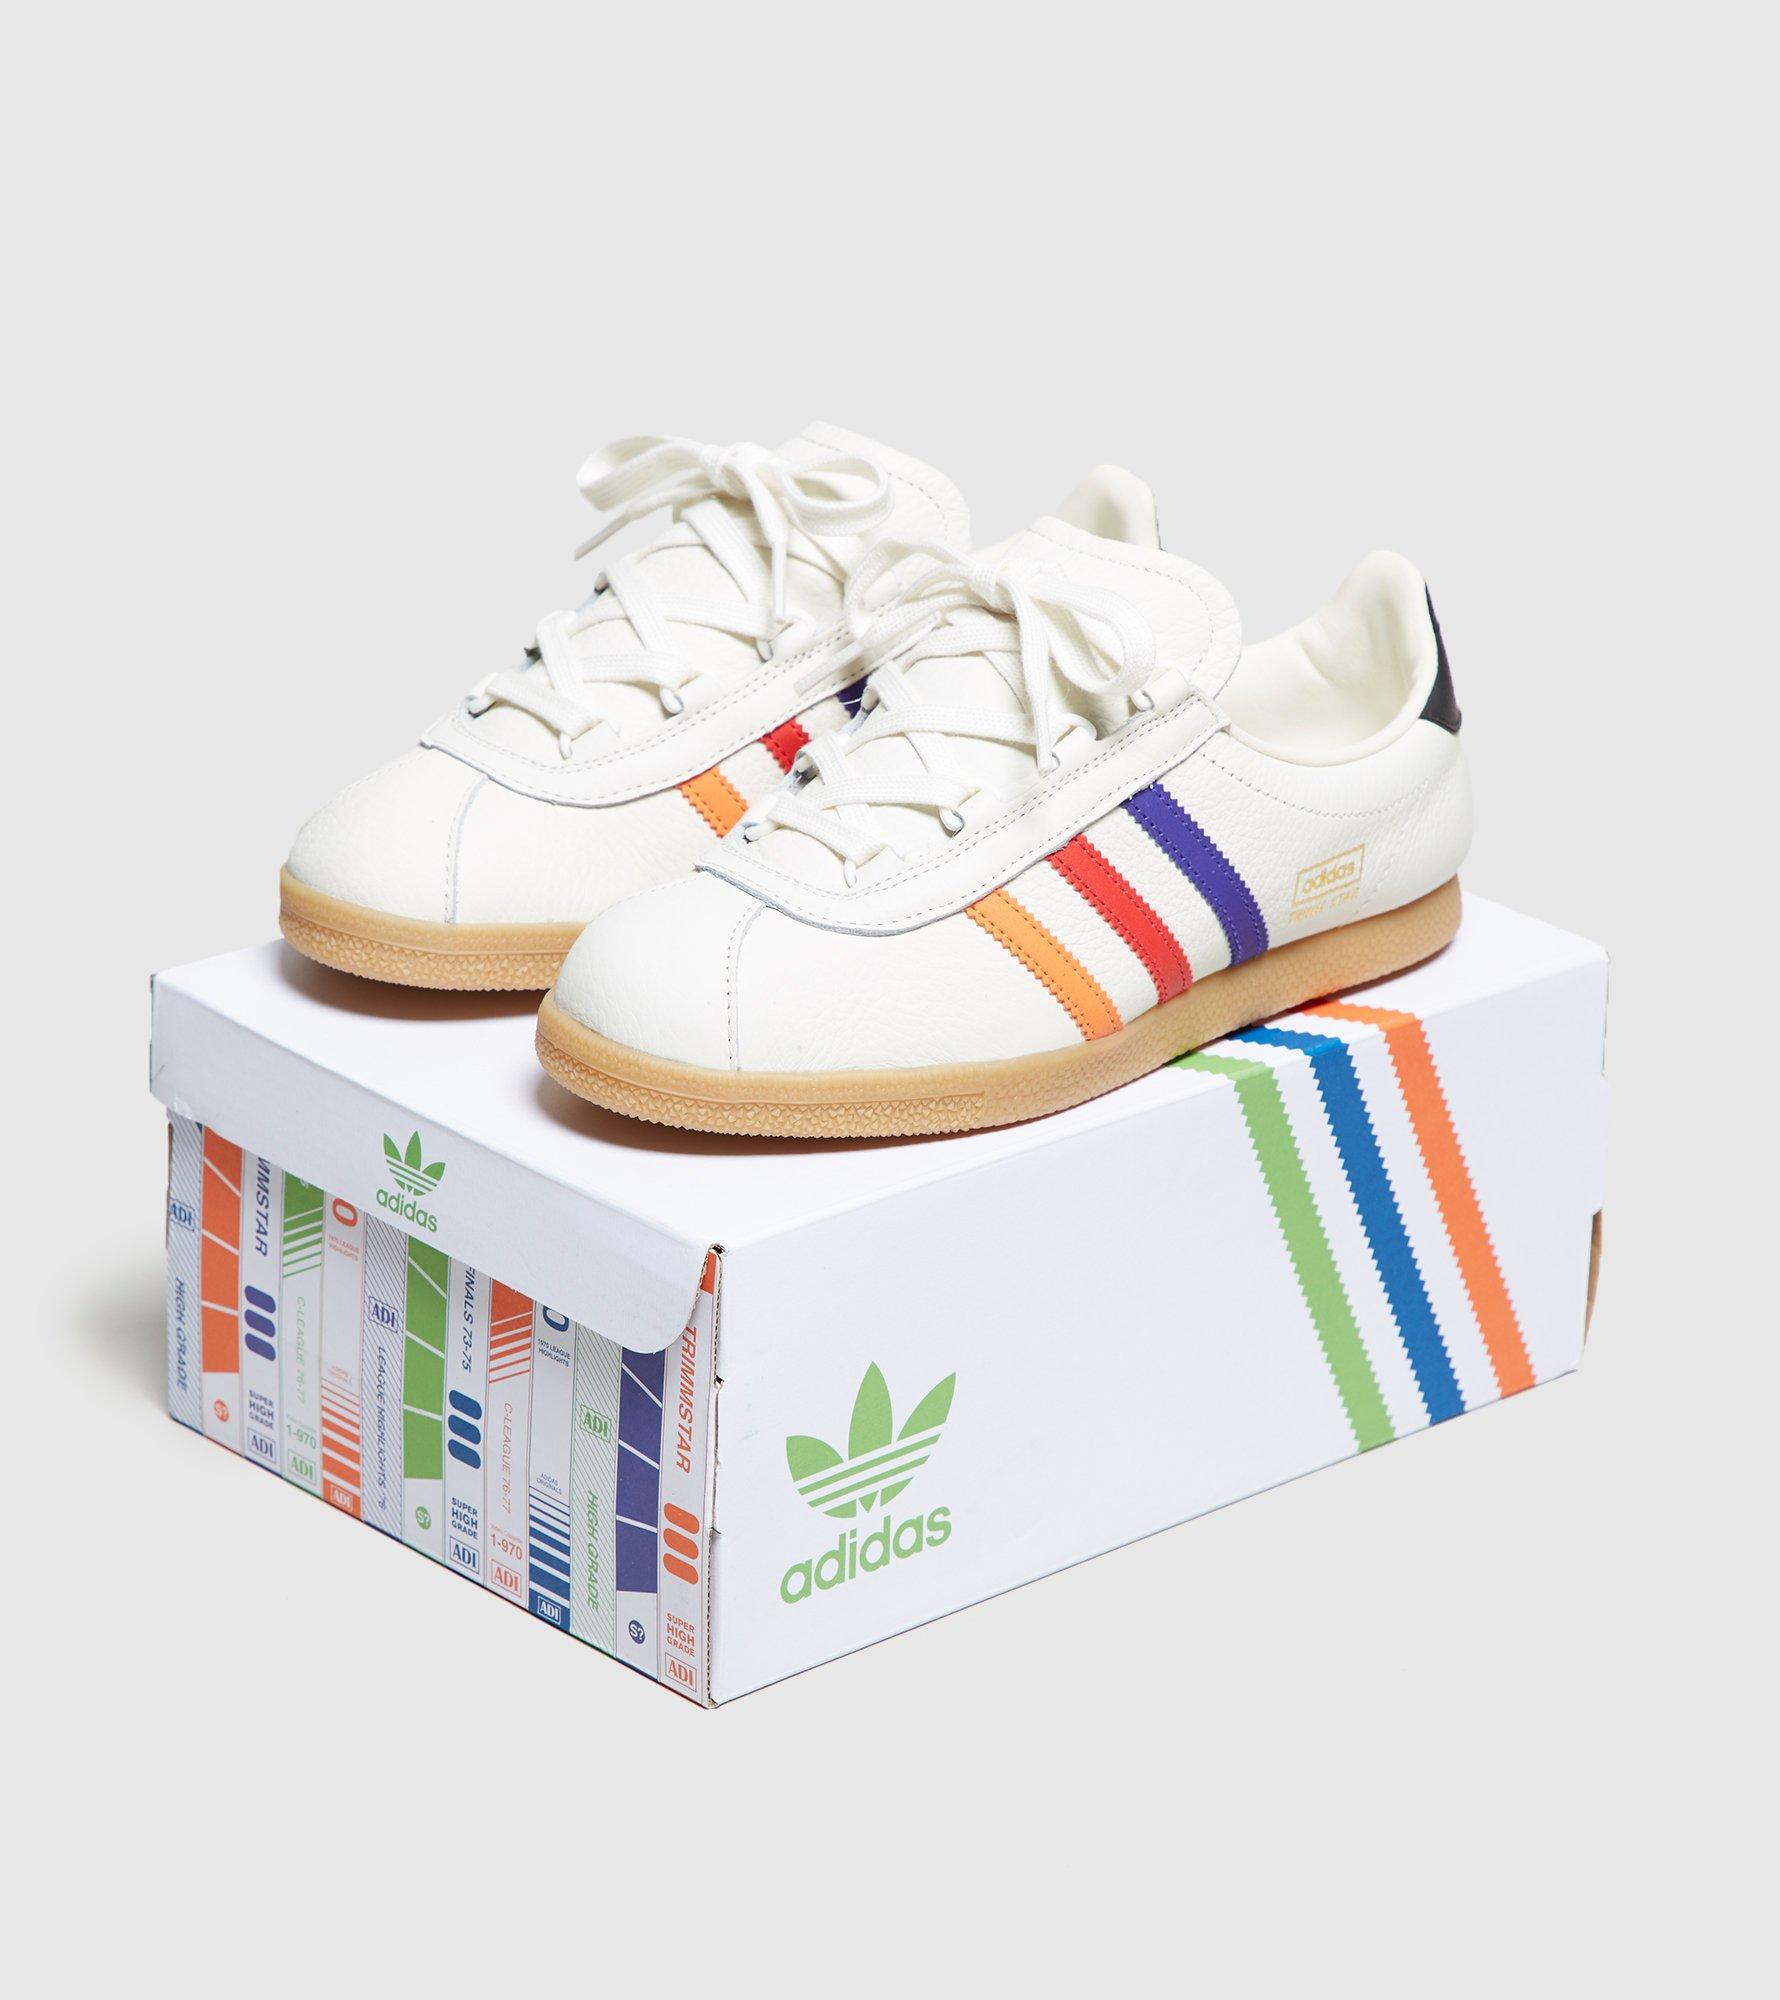 adidas vhs shoes